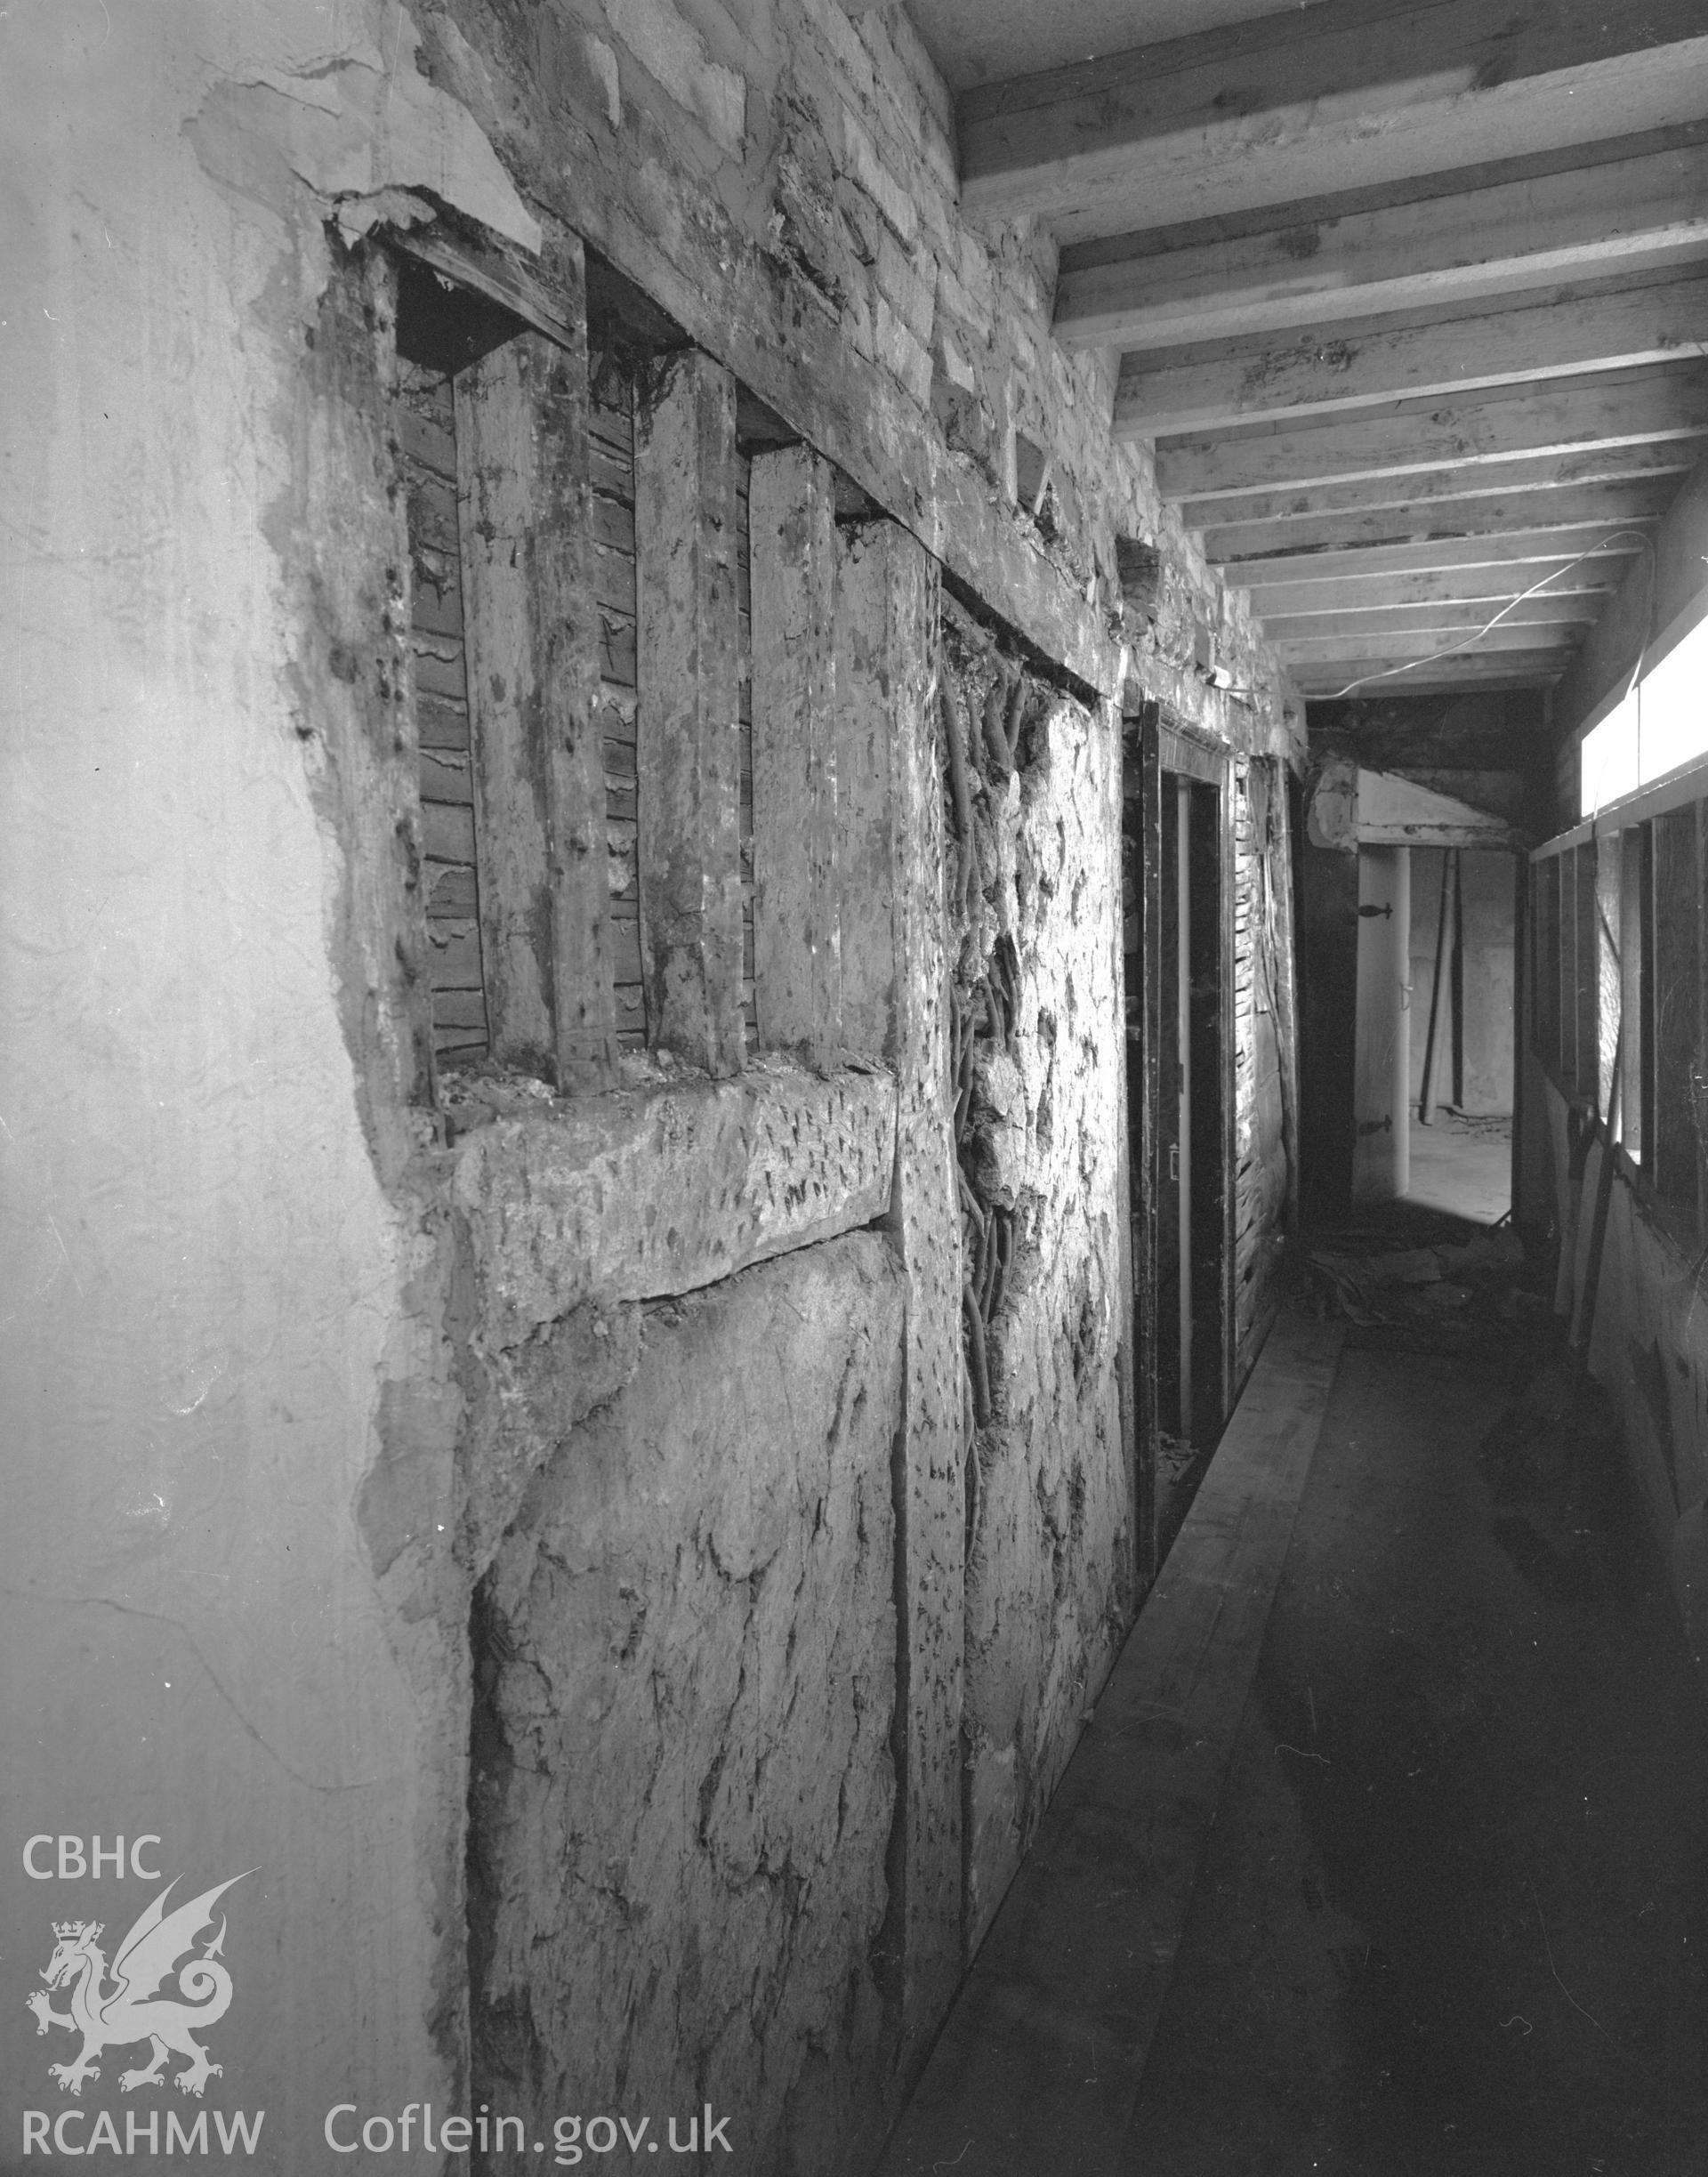 Black and white acetate negative showing interior view of George and Dragon, Beaumaris.